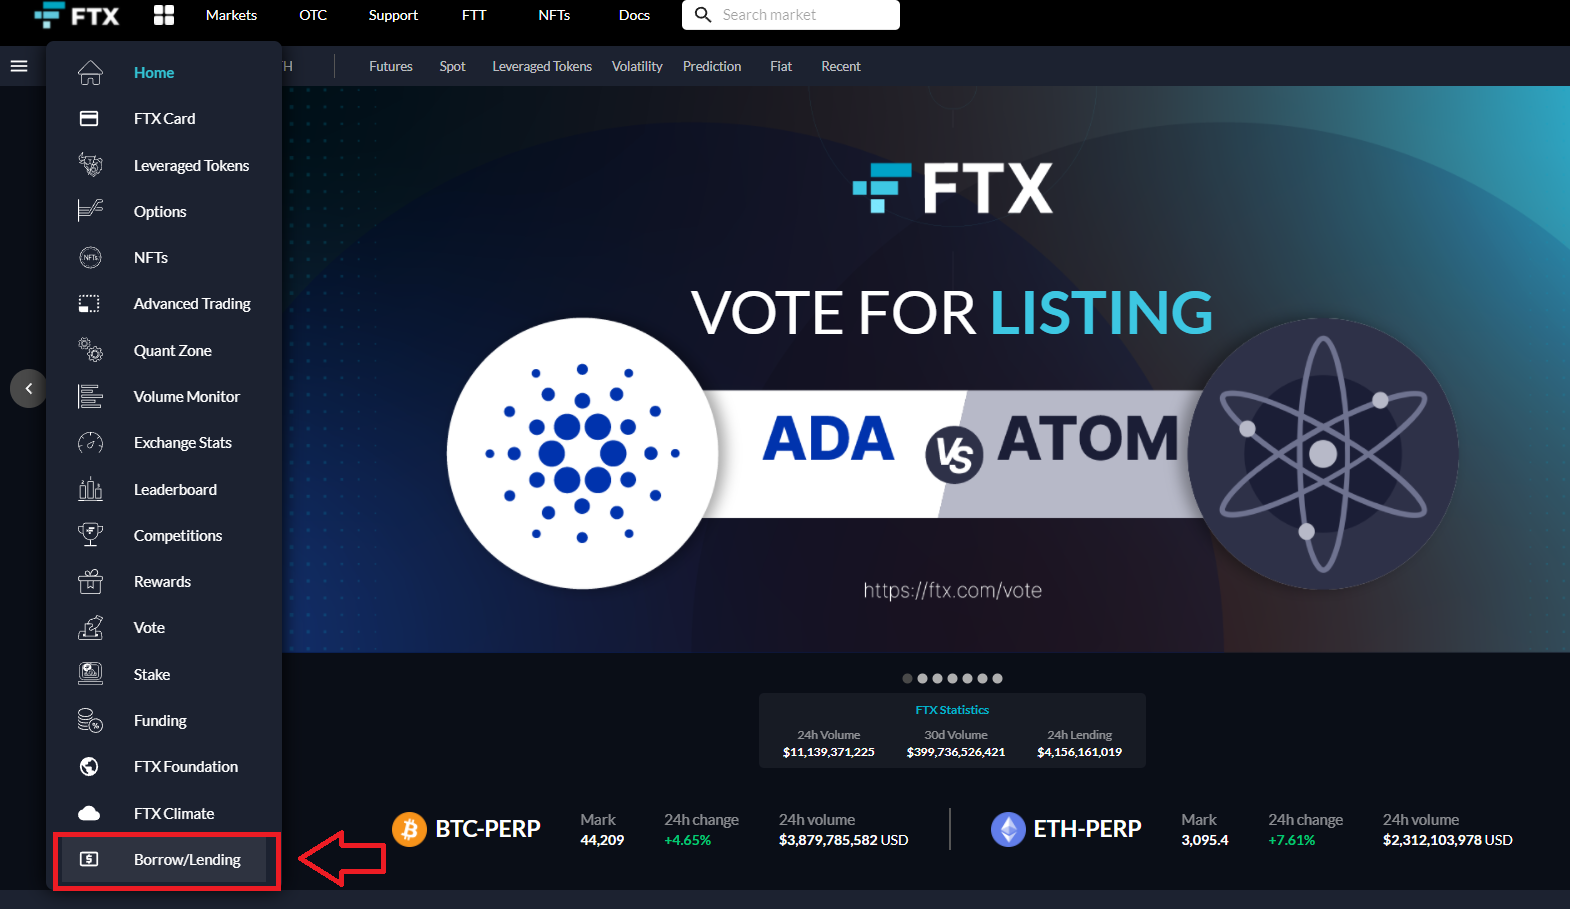 Earn money through passive income on FTX